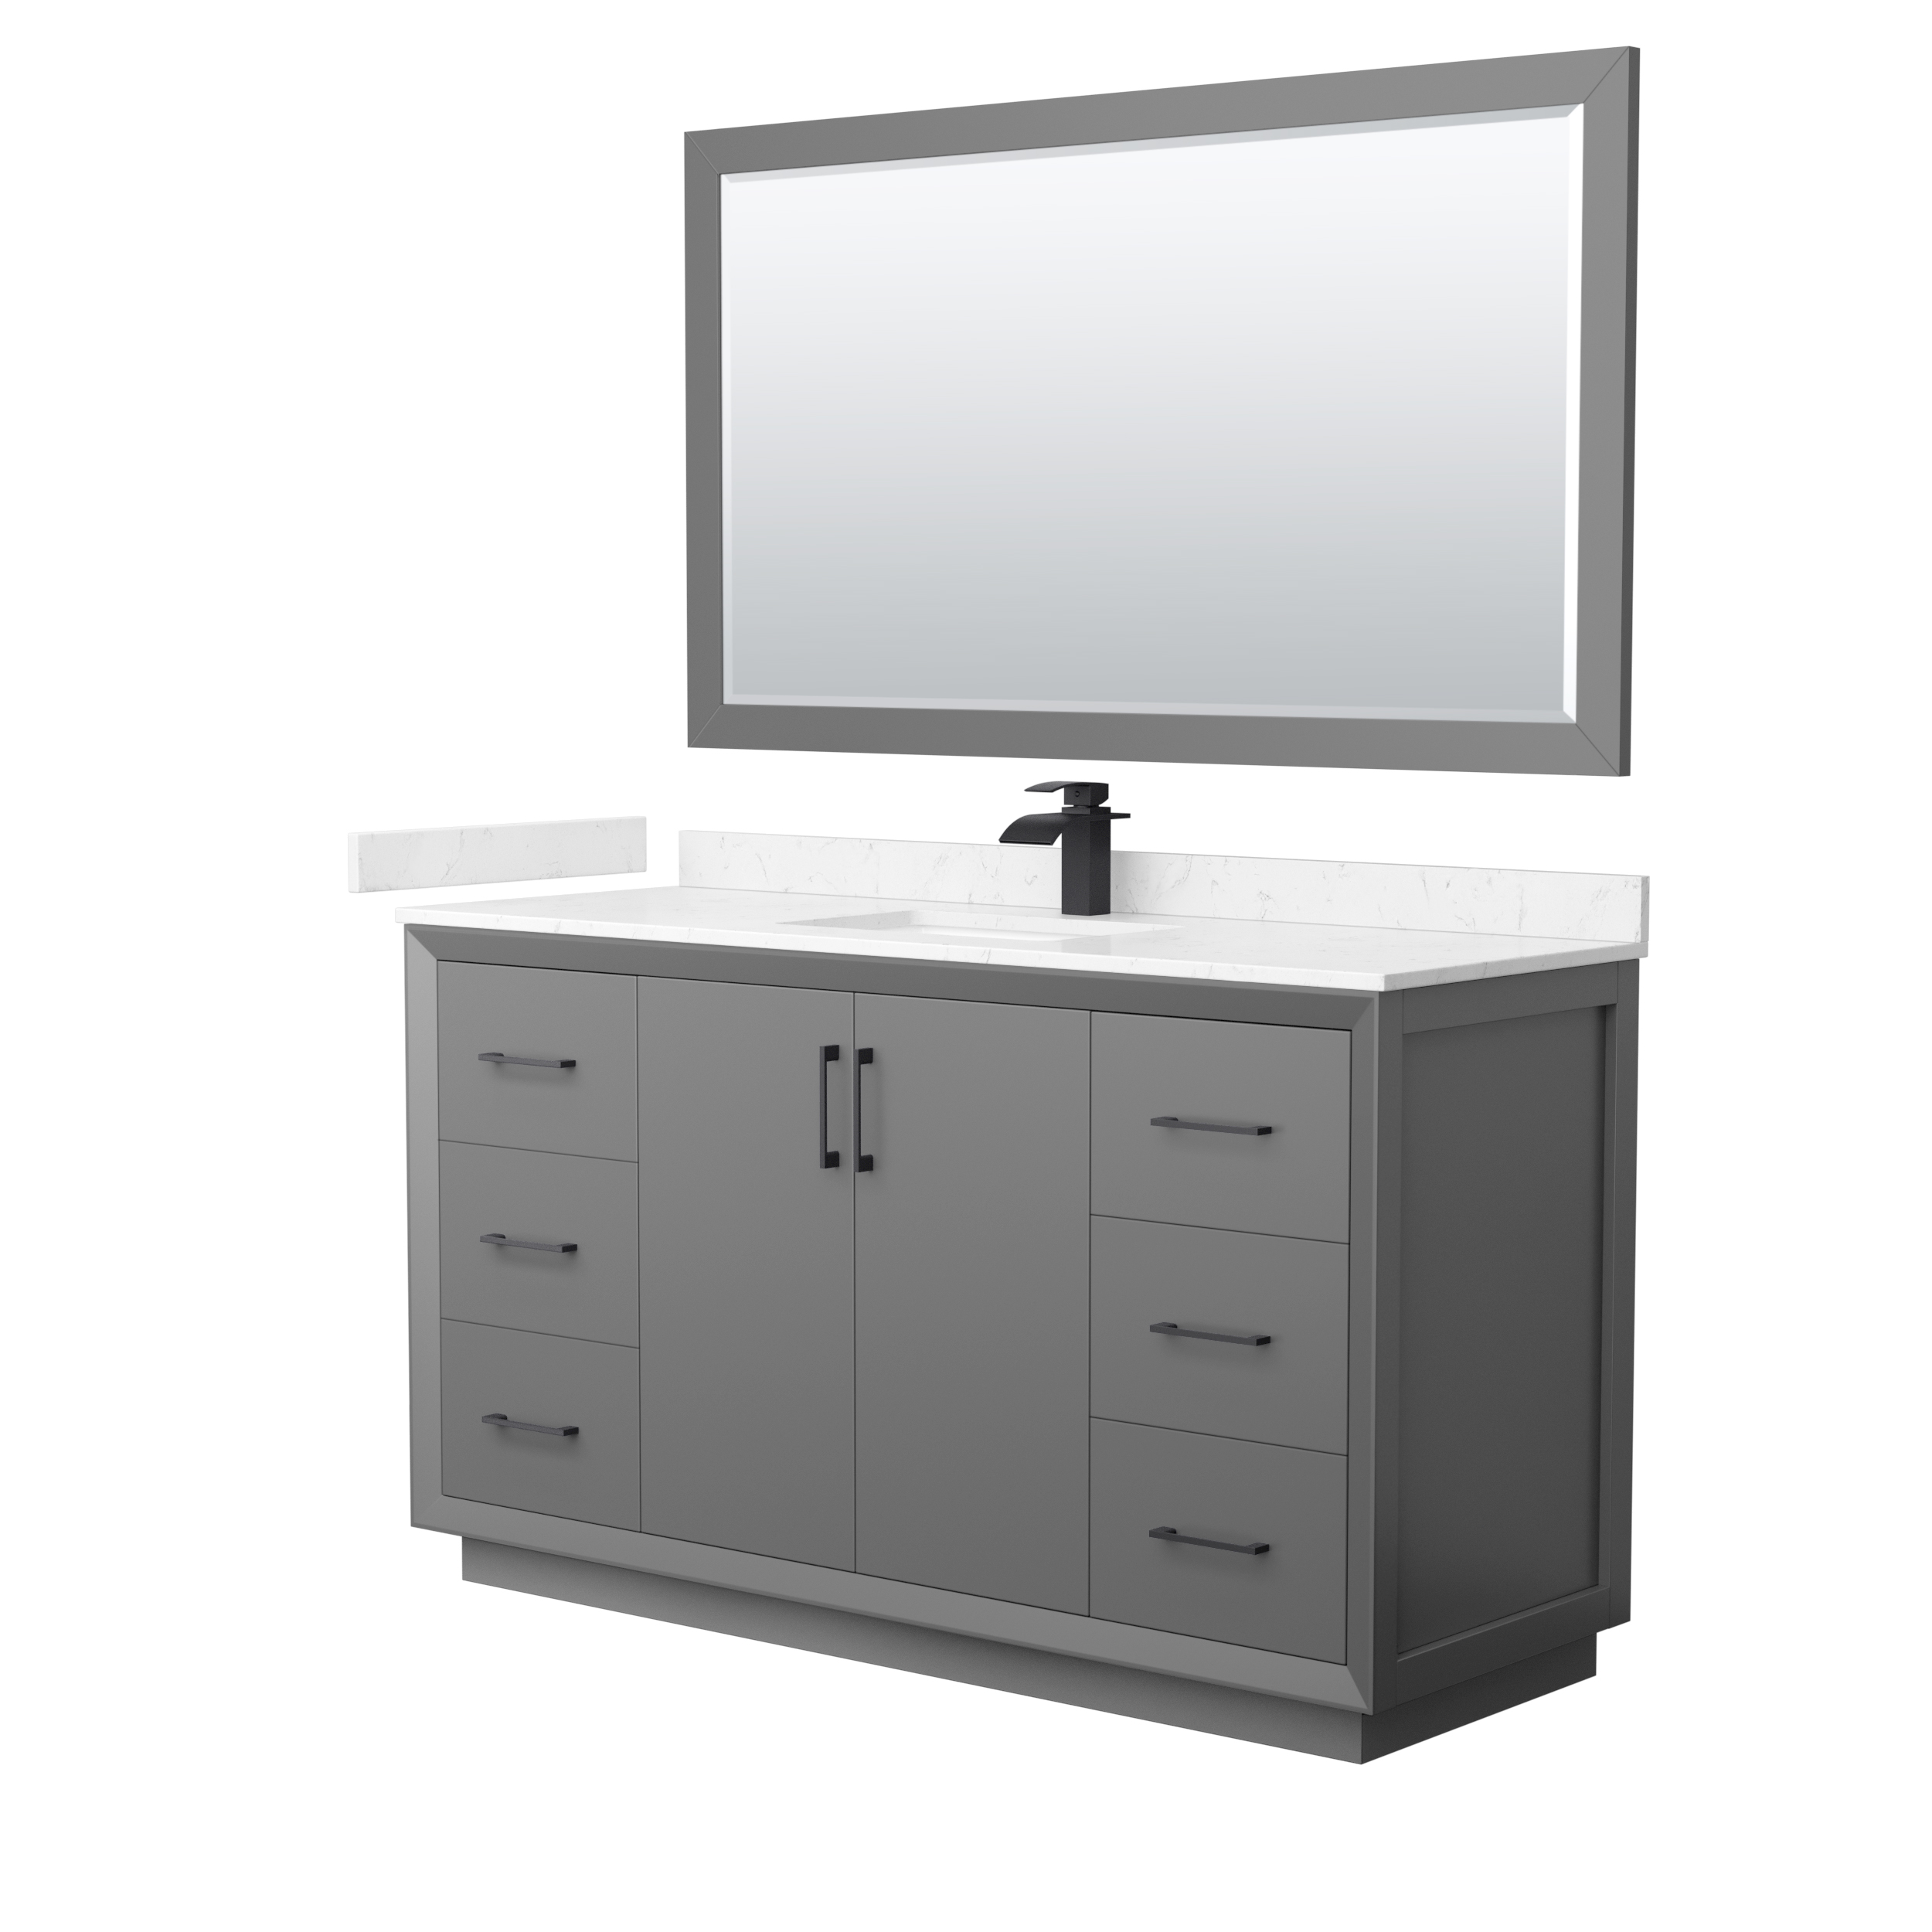 60" Transitional Single Vanity Base in Dark Grey, 3 Top Option, with 3 Hardware Options and Mirror Option